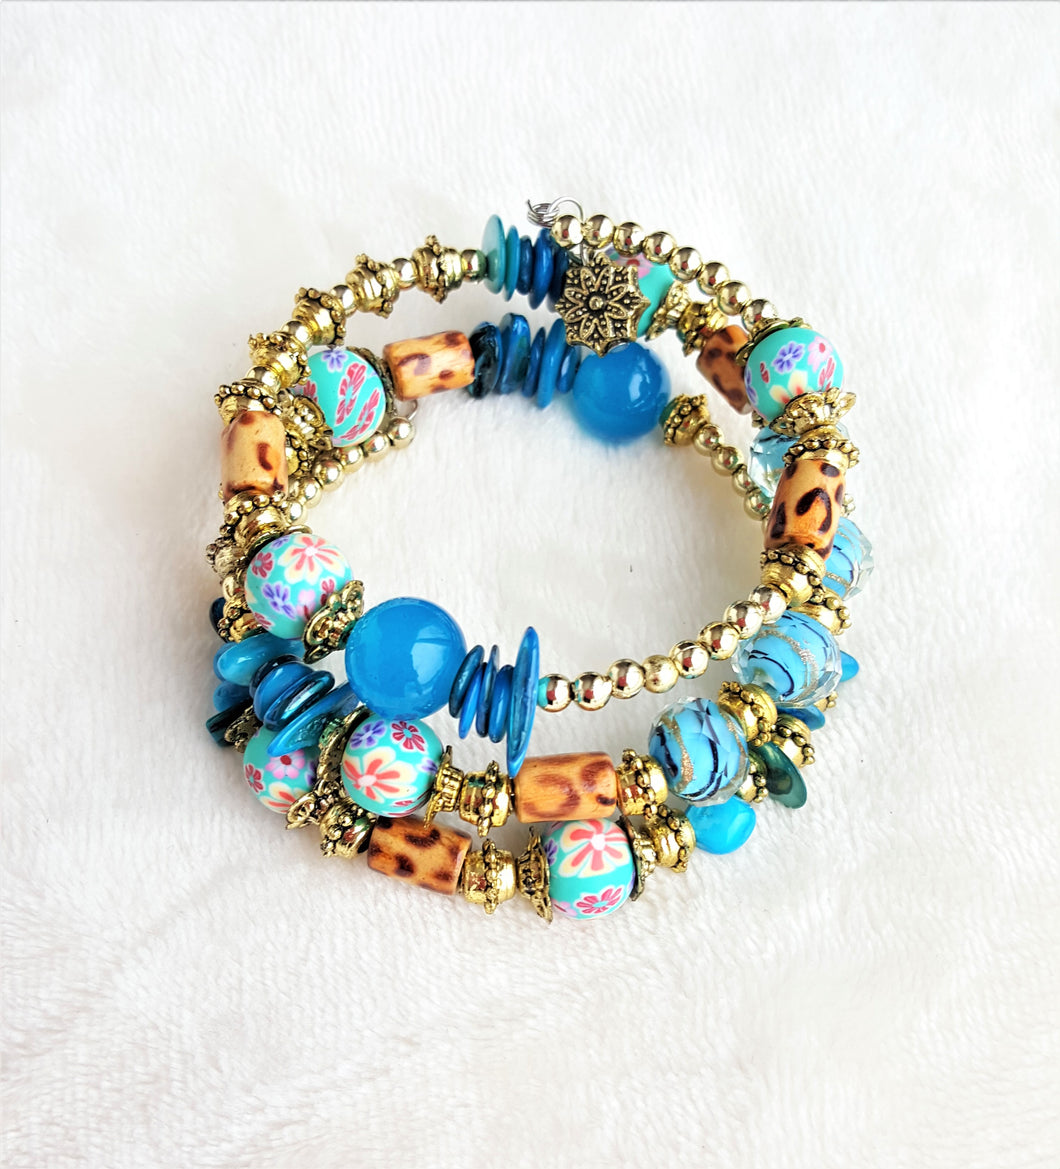 Bracelet Beaded Ethnic Bohemian with Charm, Turquoise, Gold,Brown - Urban Flair USA